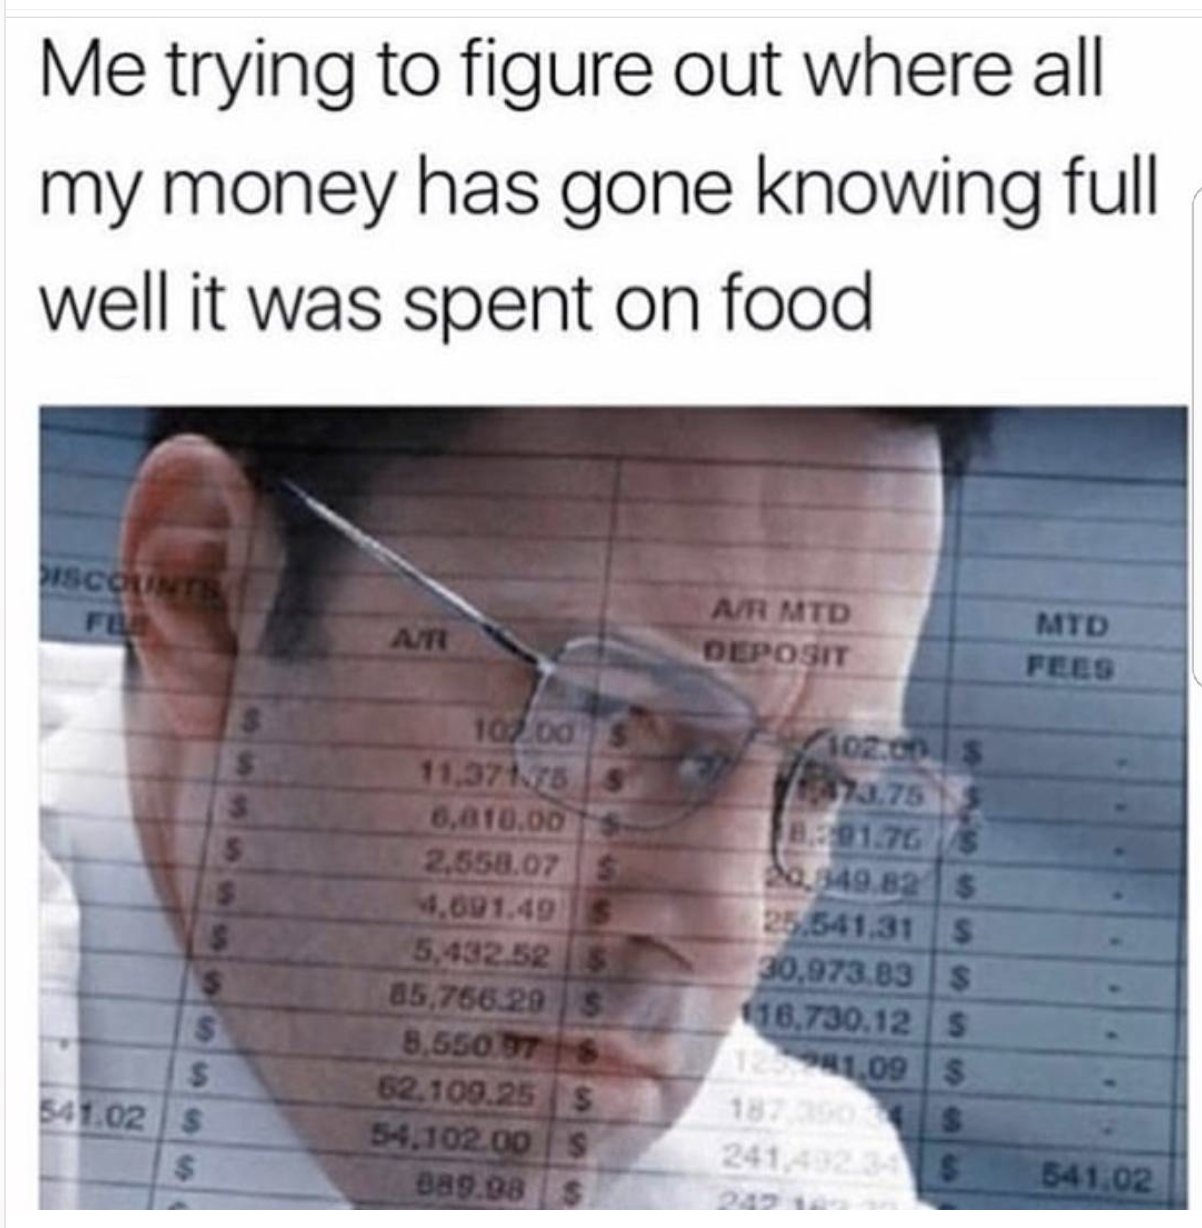 funny memes - -trying to figure out where my money went - Me trying to figure out where all my money has gone knowing full well it was spent on food Counts Fe At AT Mtd Deposit Mtd Fees 100 od 11.3718 0.010.00 2,552.075 4.001.49 5,432.52 85,766 295 3,560 